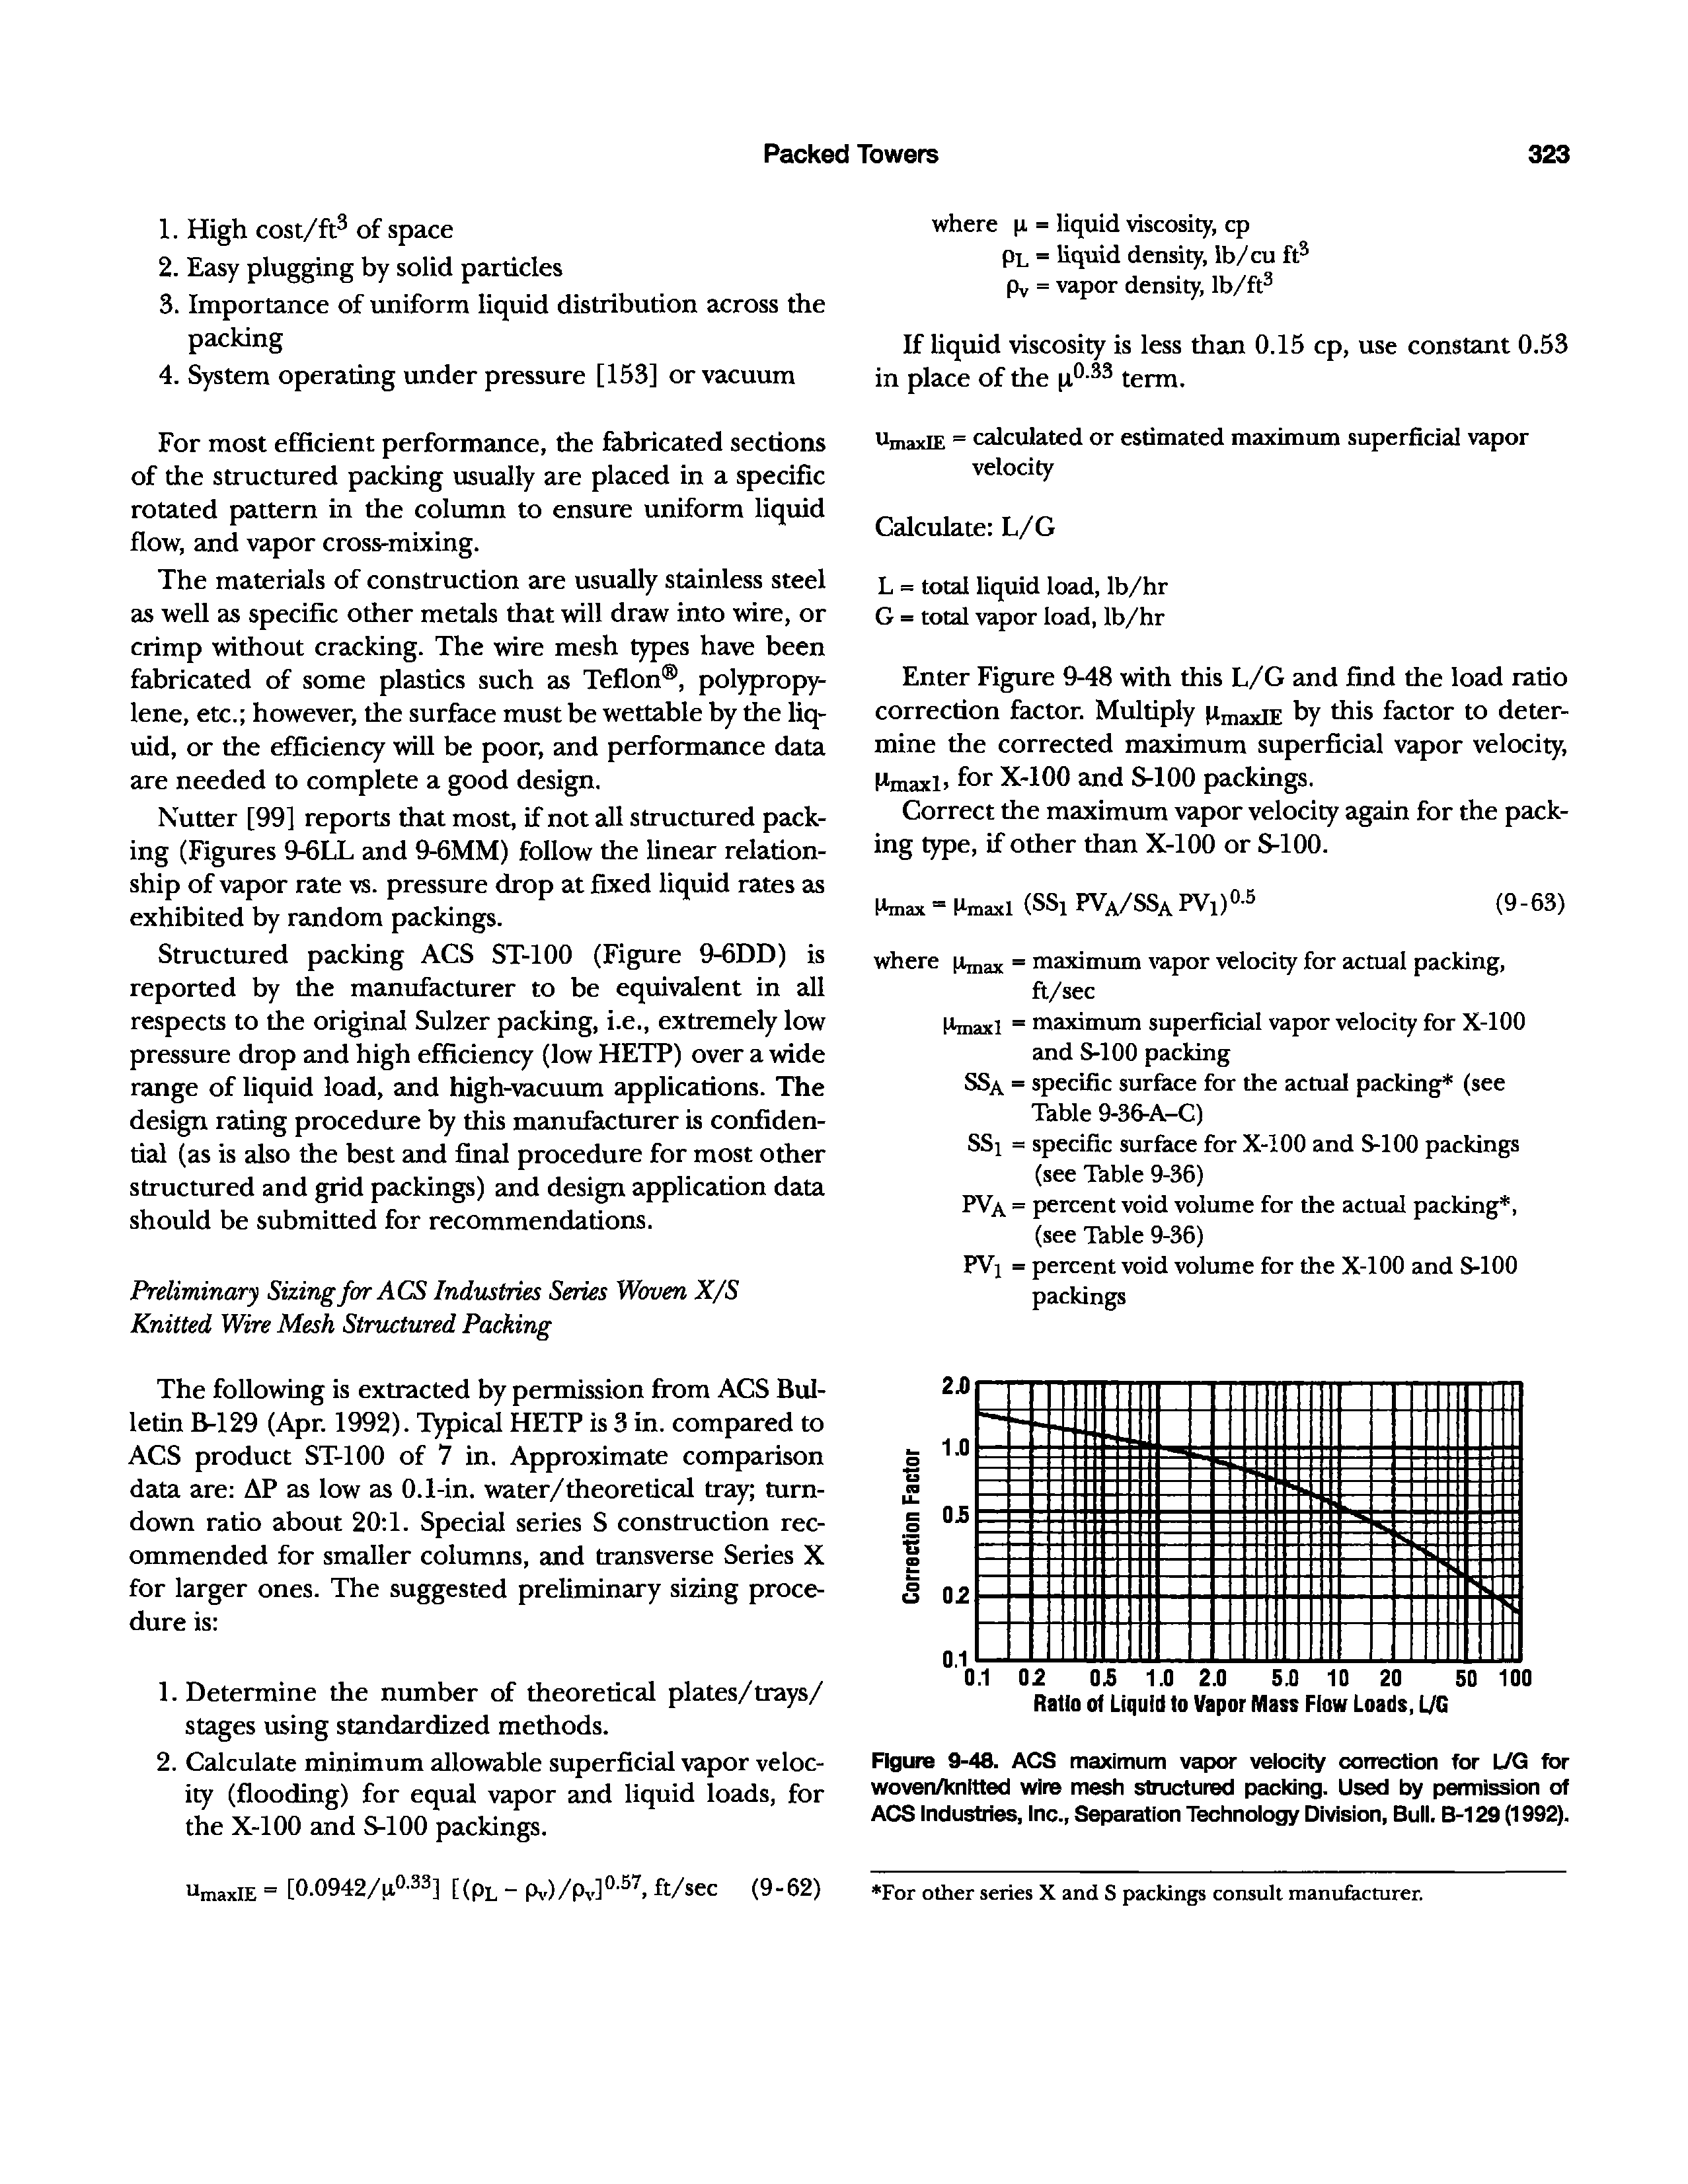 Figure 9-48. ACS maximum vapor velocity correction for L/G for woven/knitted wire mesh structured packing. Used by permission of ACS Industries, Inc., Separation Technology Division, Bull. B-129 (1992).